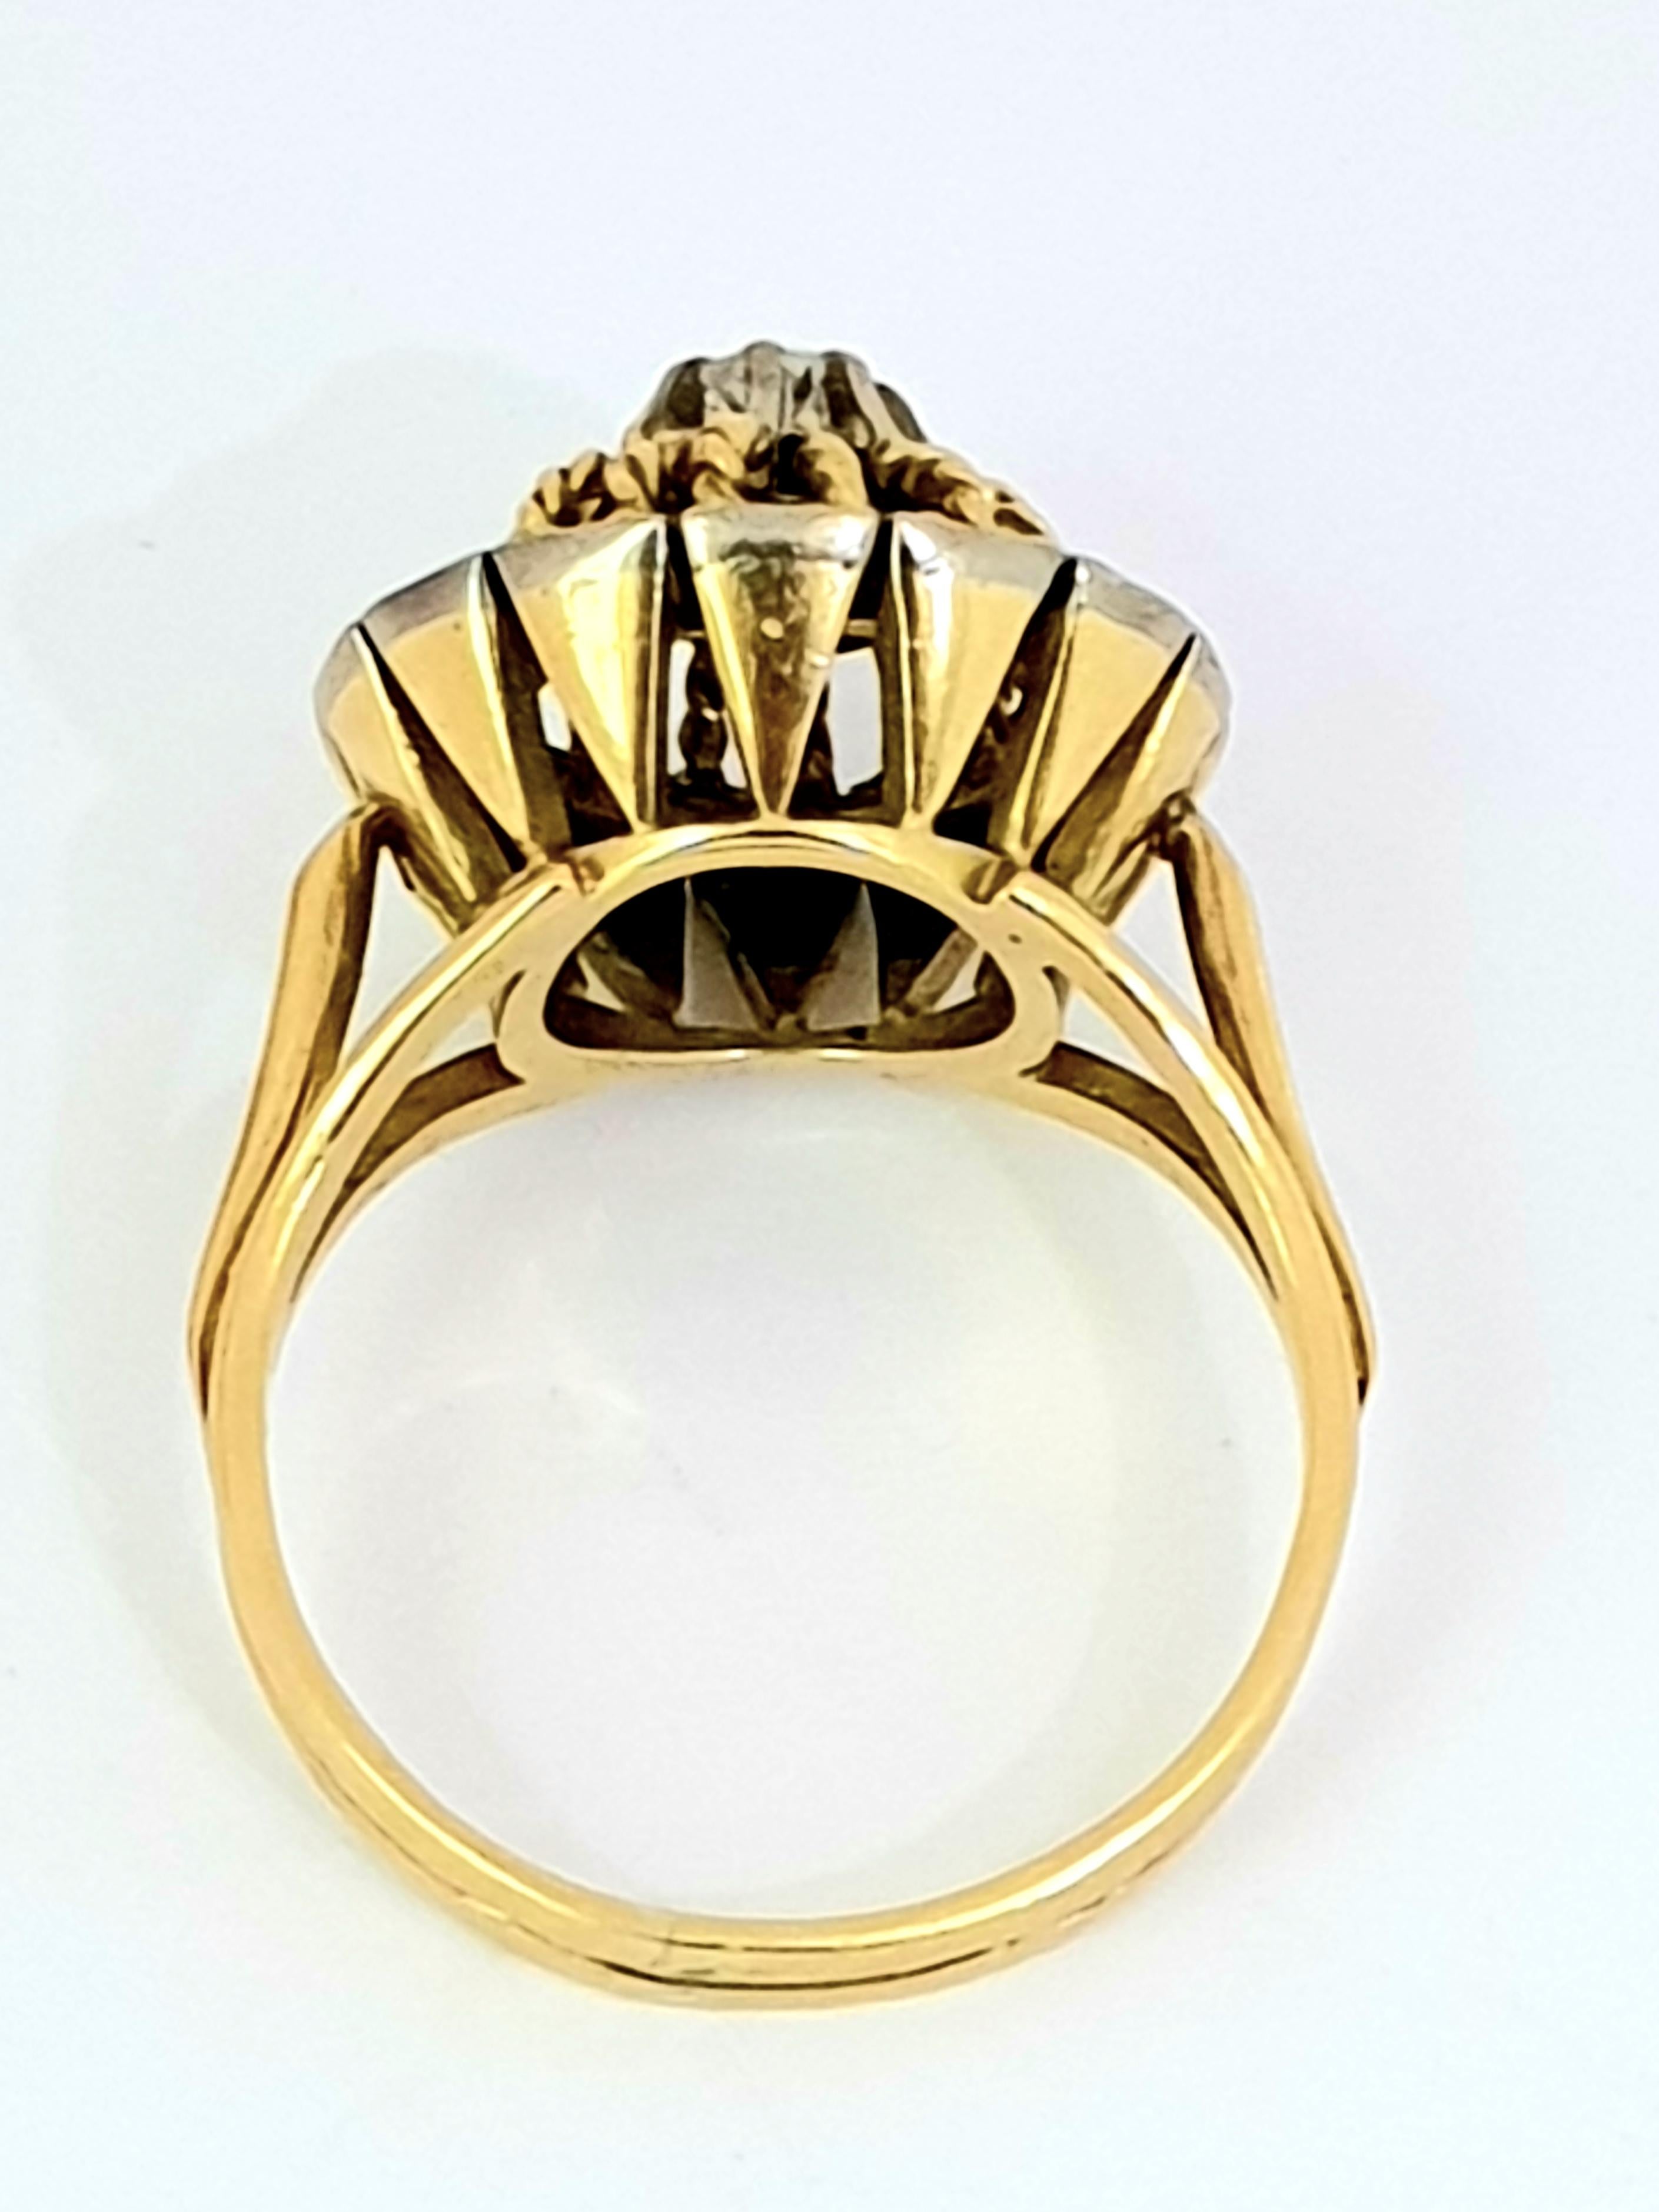 Offering an 18 kt yellow gold antique dome diamond ring . The center old cut diamond is about 0.10 ct. It is surrounded
by 14 0.03 ct diamonds.Total diamond weight is 0.52 ct approx.No visible hallmarked but tested as 18 kt 
Probably french origin.